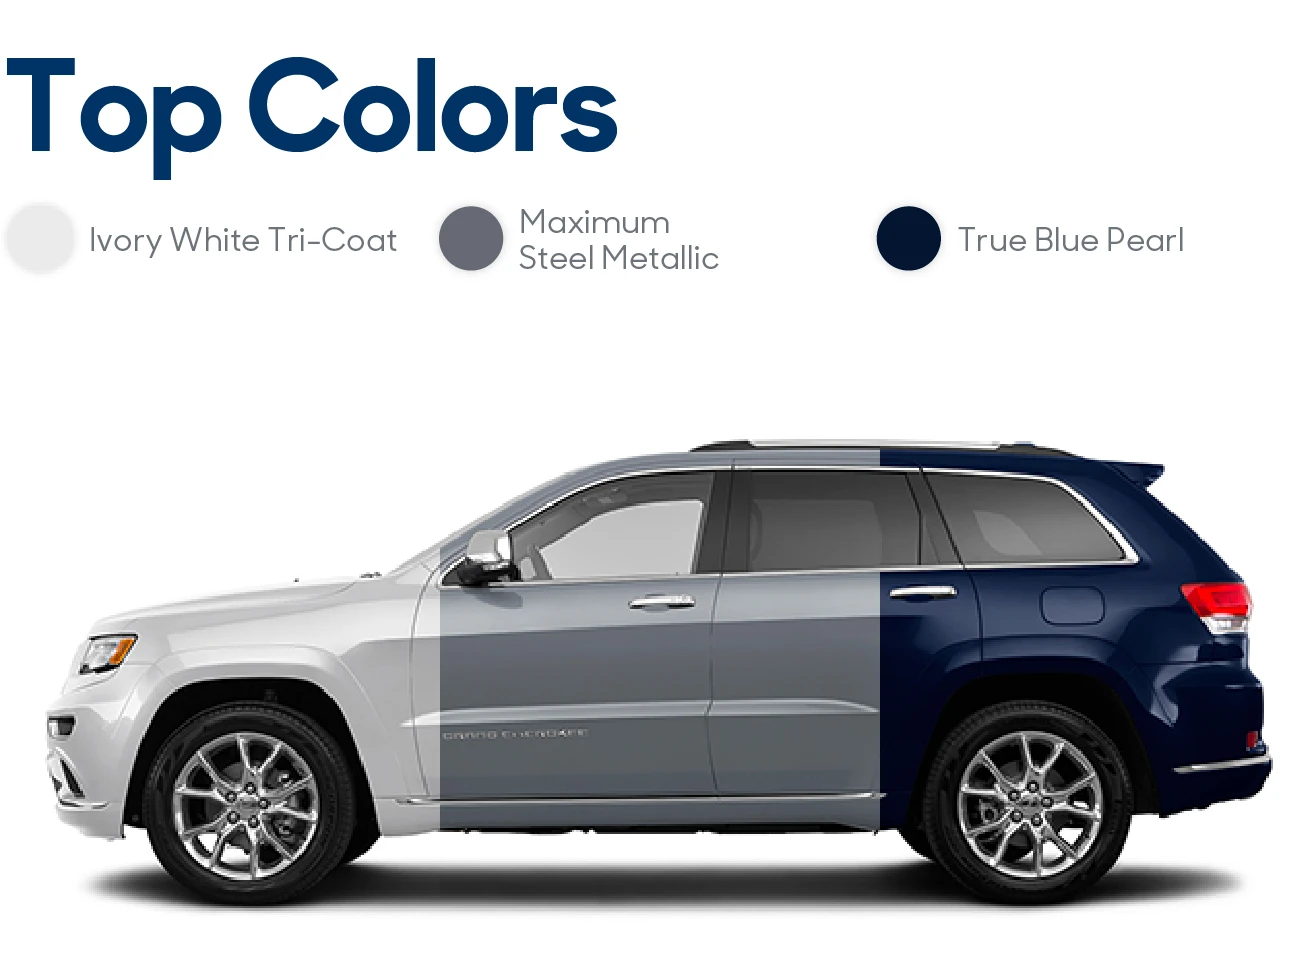 2016 Jeep Grand Cherokee: Reviews, Photos, and More: Color Options | CarMax